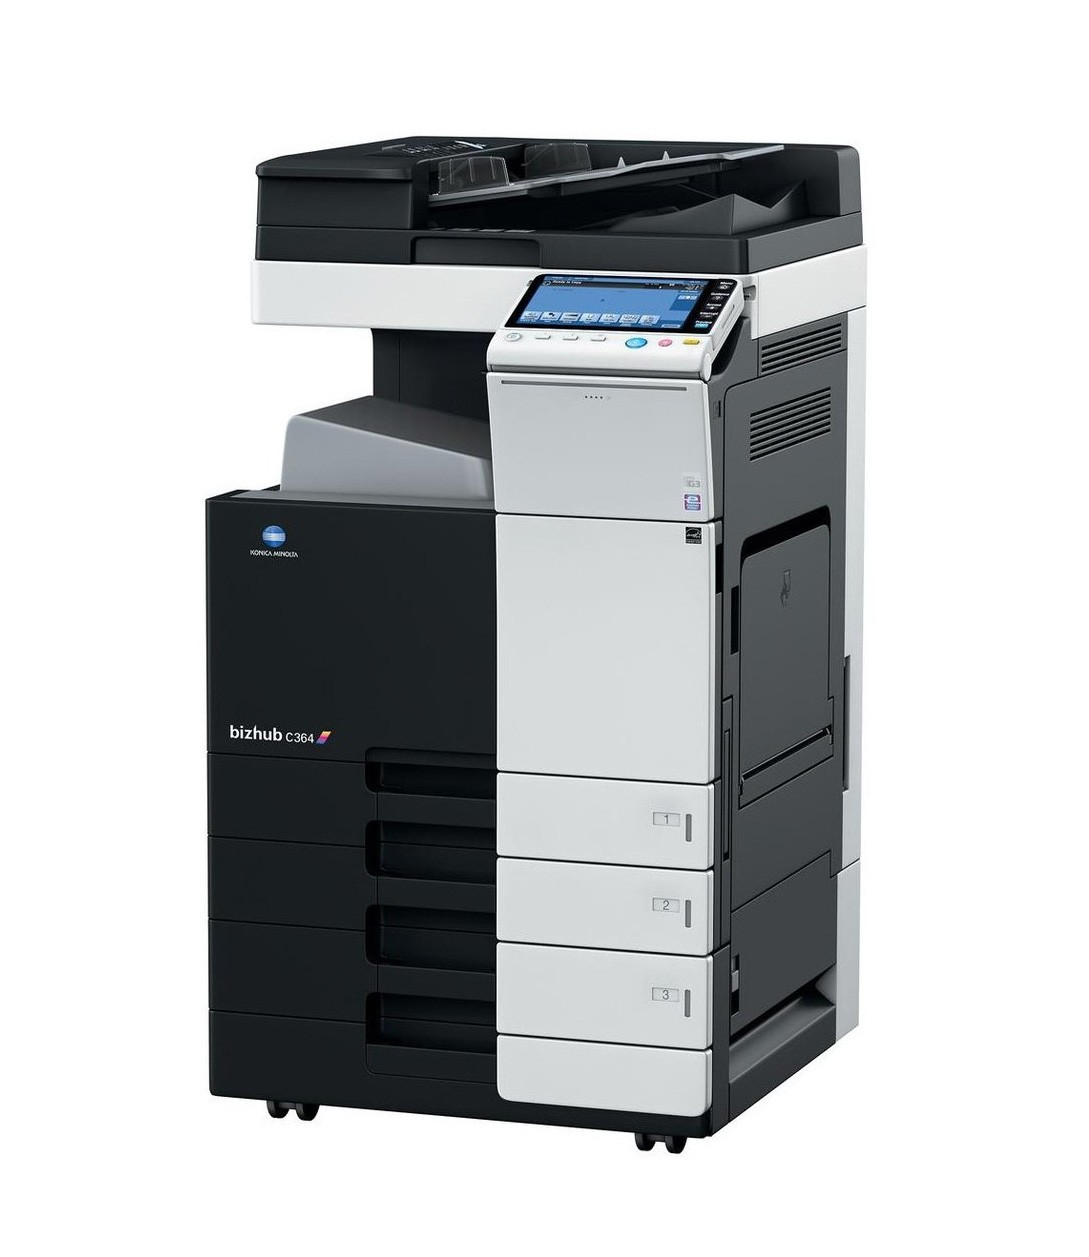 lease or rent a copier with on-site setup and maintenence